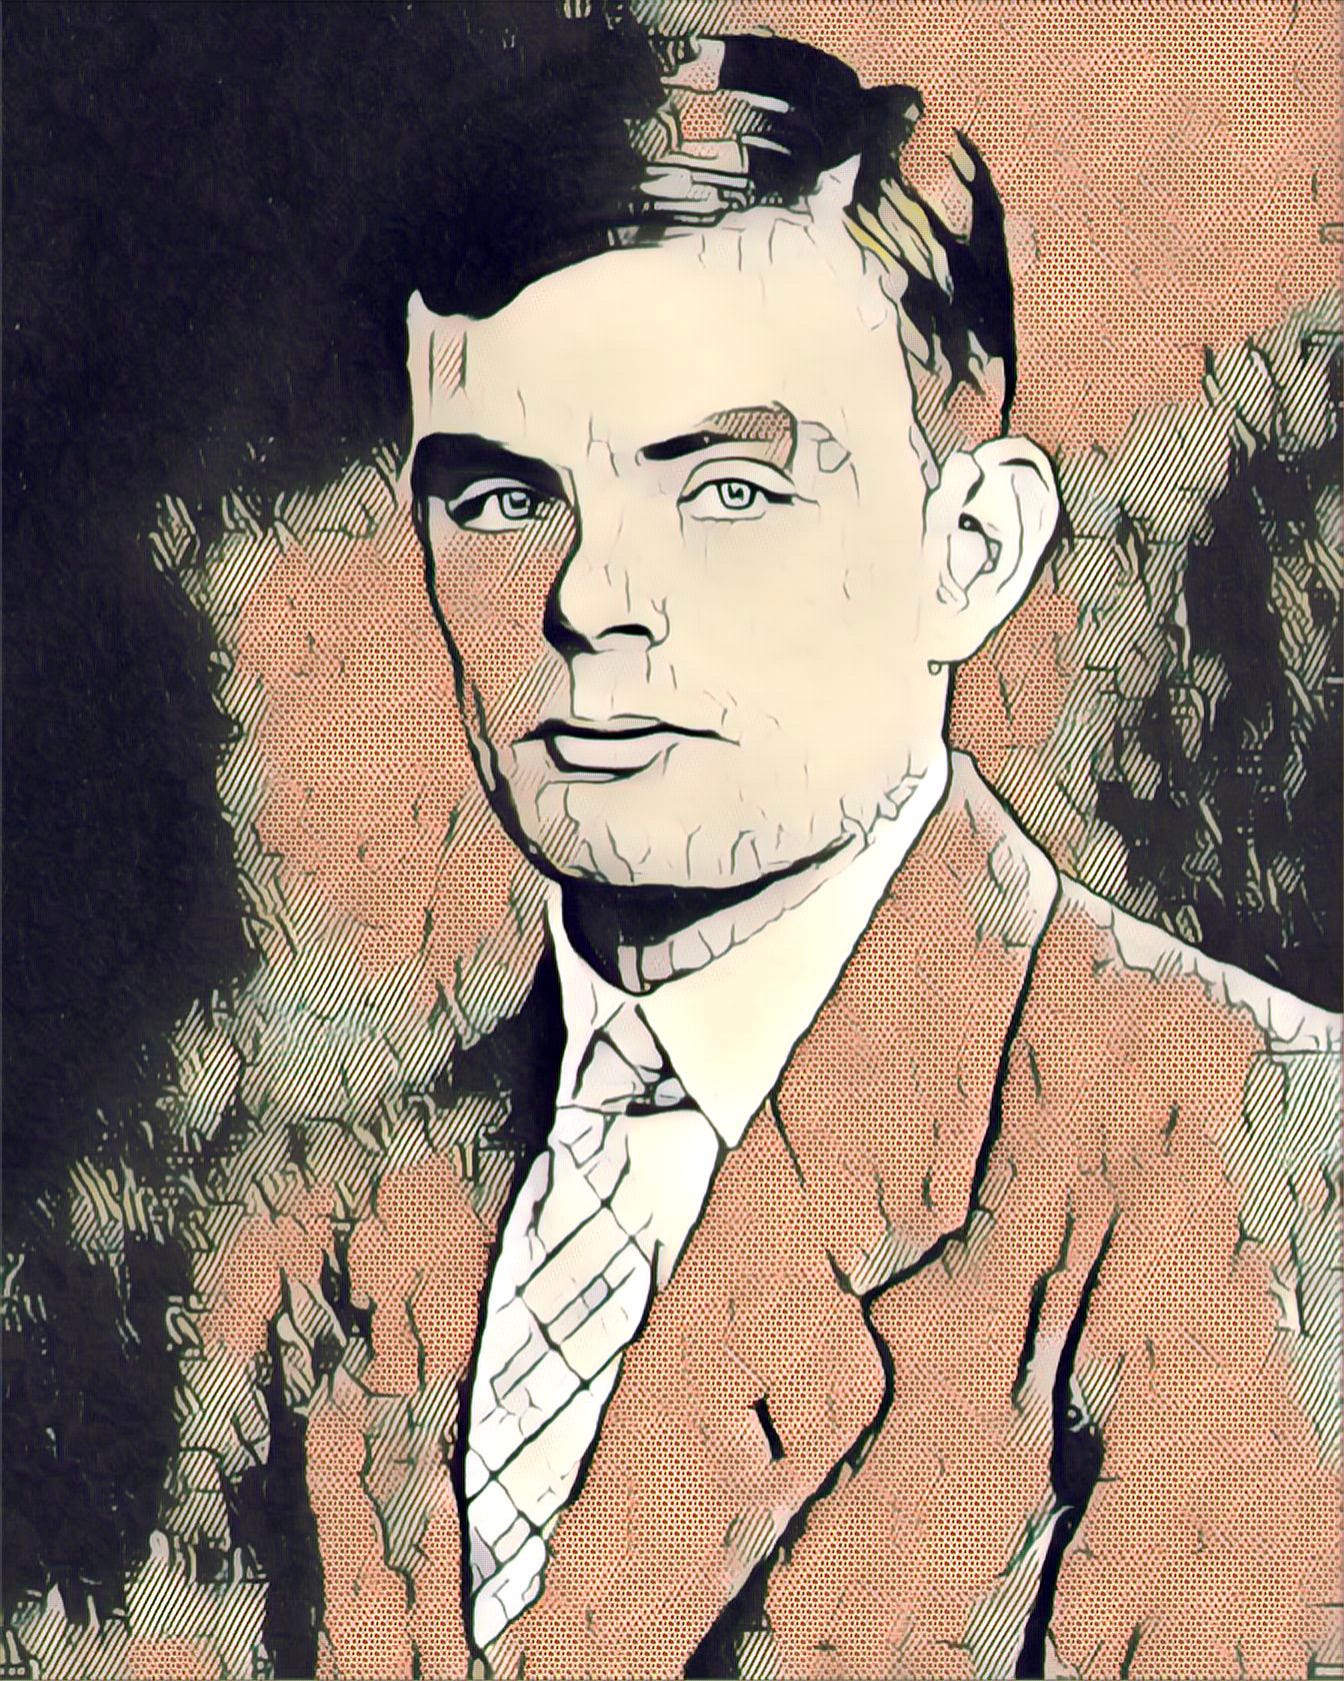 Alan Turing - Mathematician Biography, Contributions and Facts